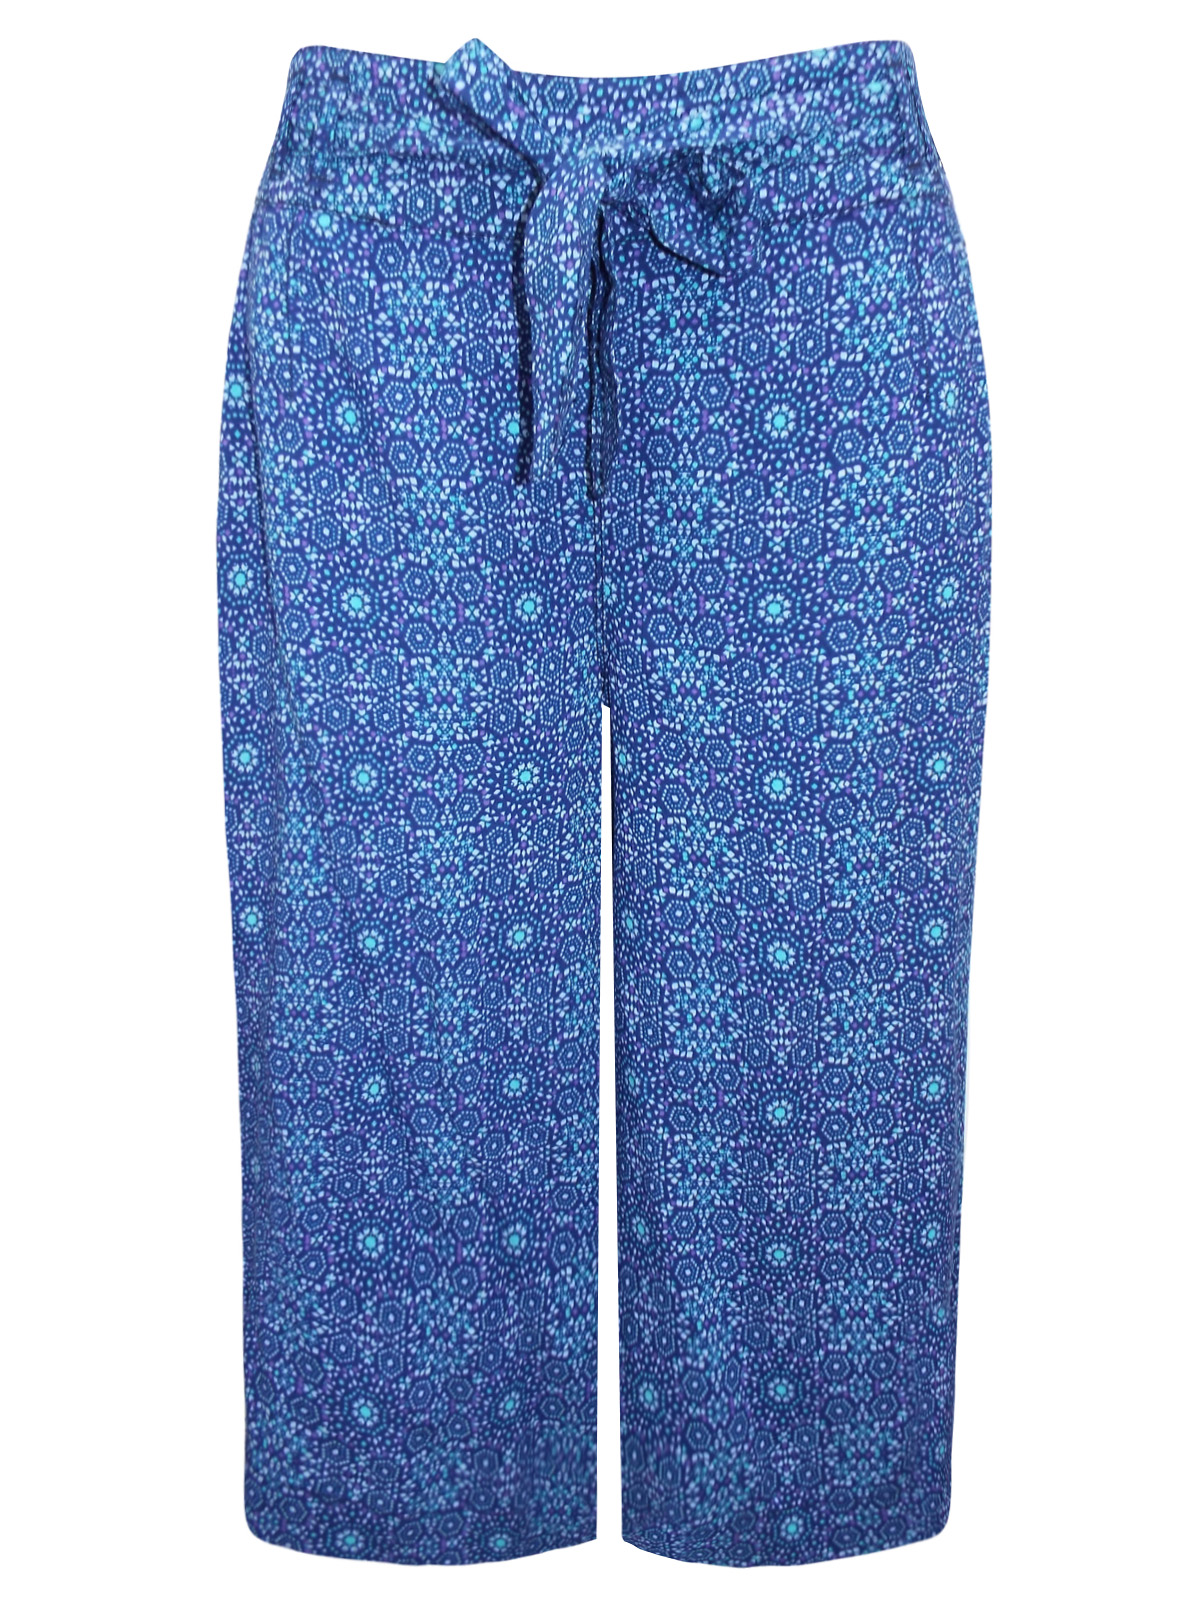 Marks and Spencer - - M&5 NAVY Kaleidoscope Print Culottes - Size 8 to 10